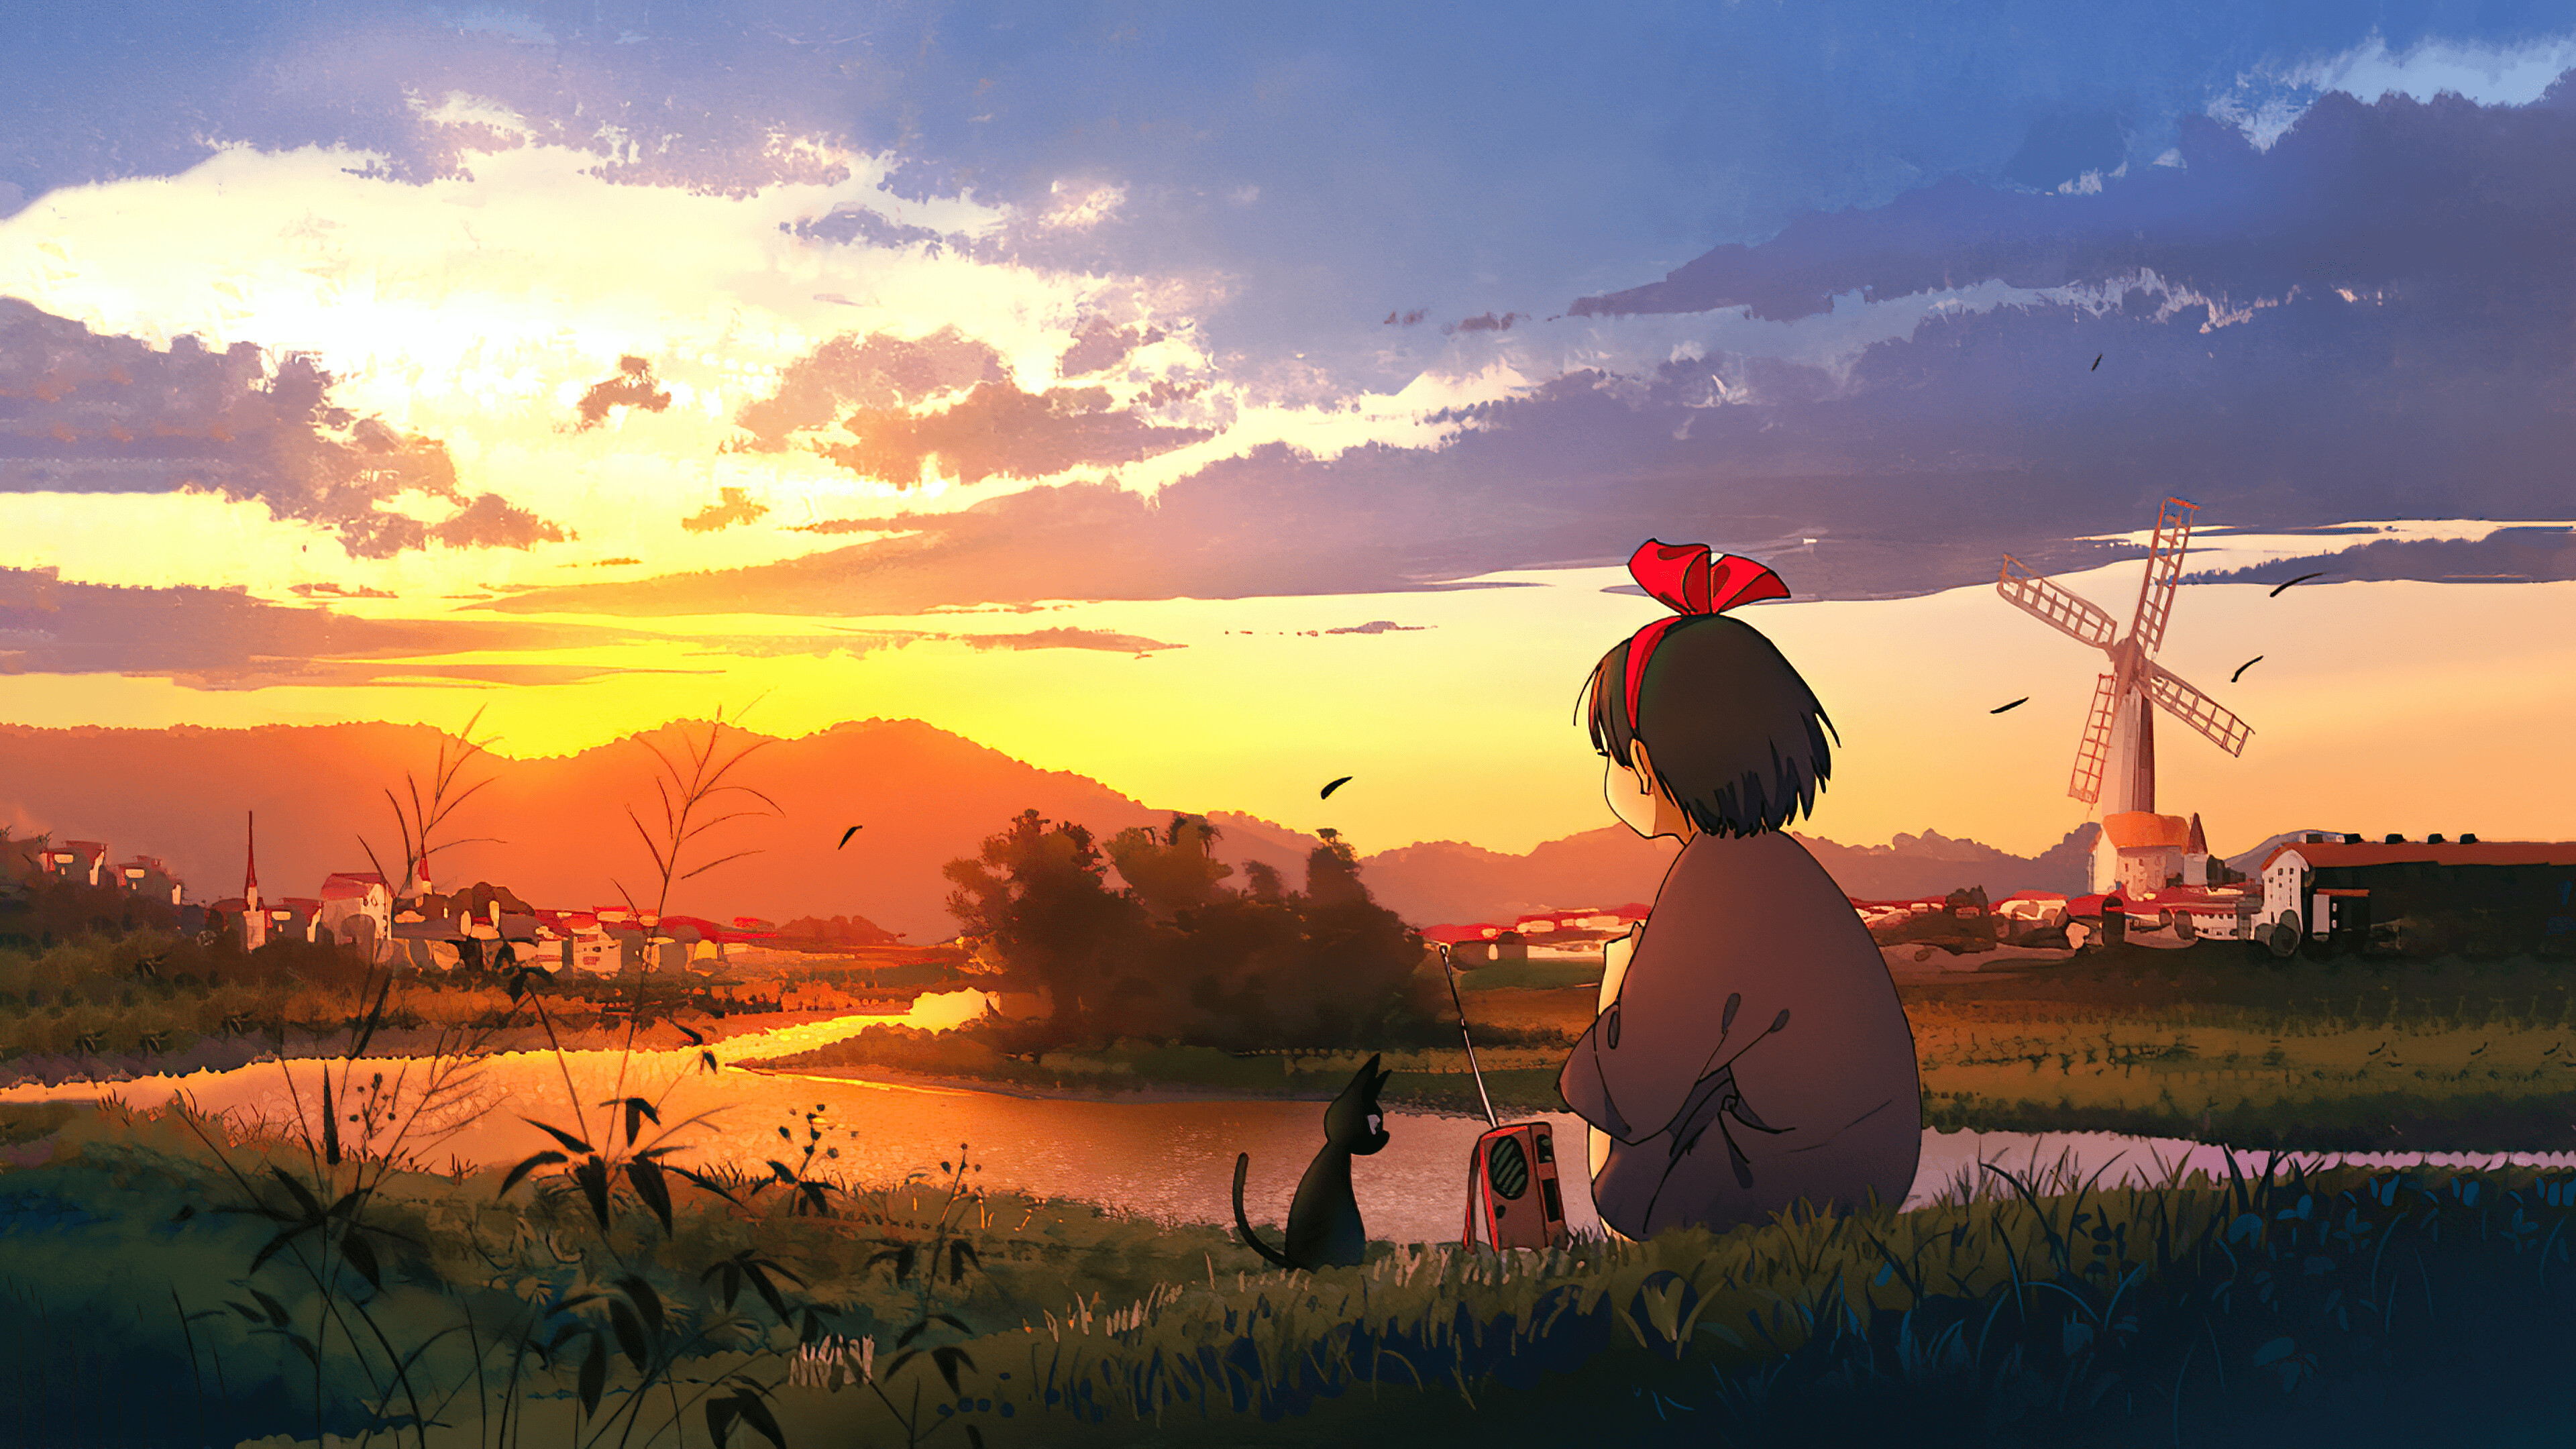 Kiki's Delivery Service: A 1989 Japanese animated fantasy film written, produced, and directed by Hayao Miyazaki. 3840x2160 4K Background.